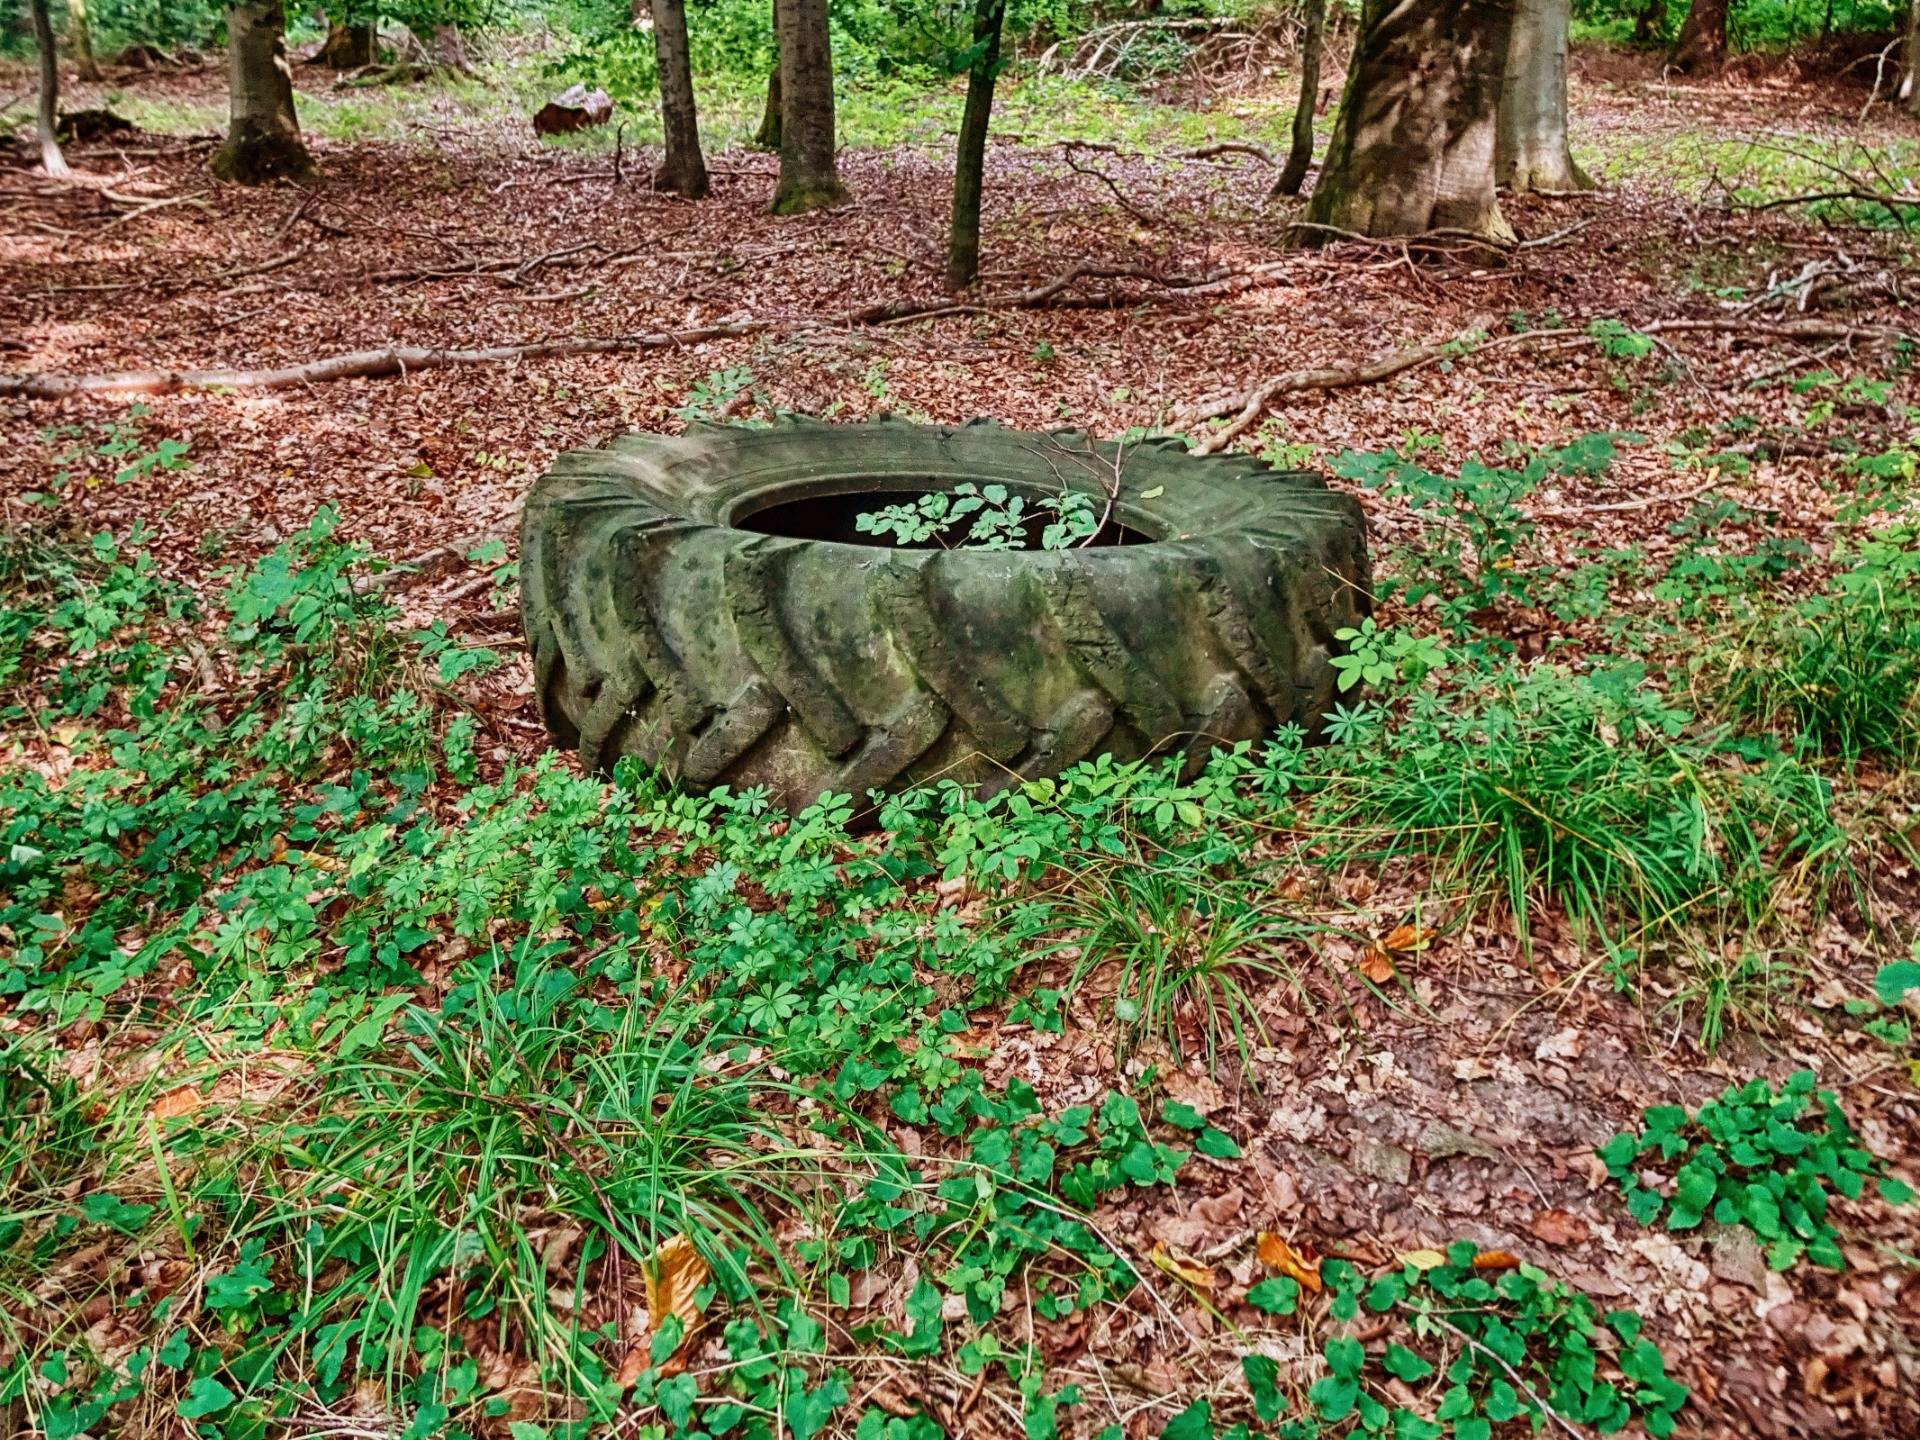 Russian tire, left in a forest.